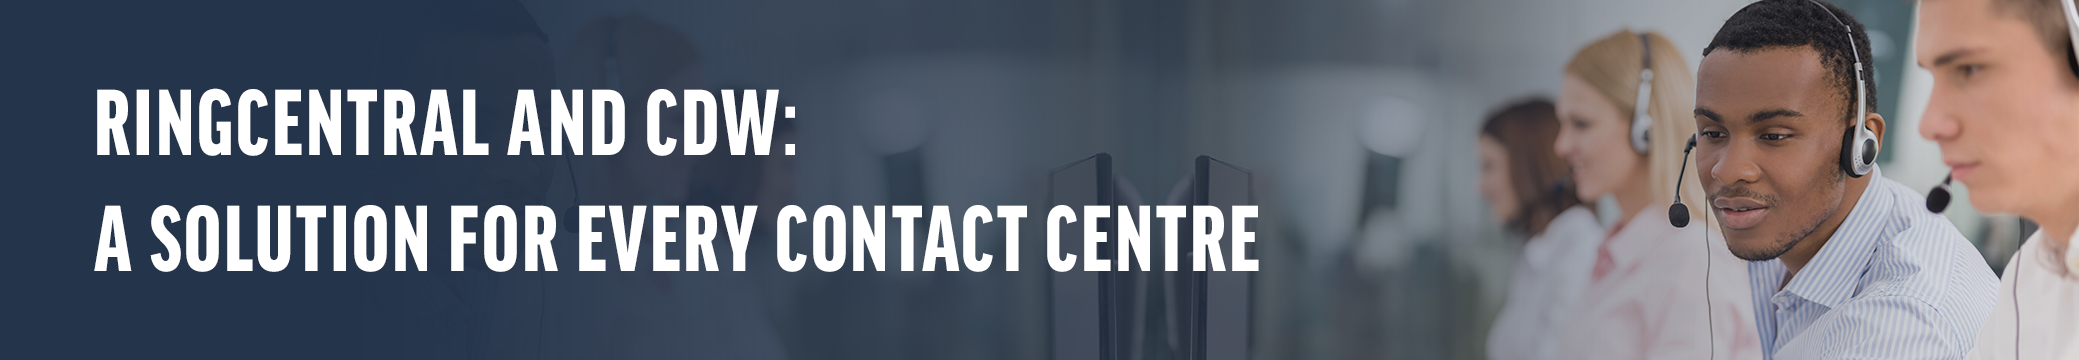 RingCentral_Value Prop_Contact Centre Landing page banner V1